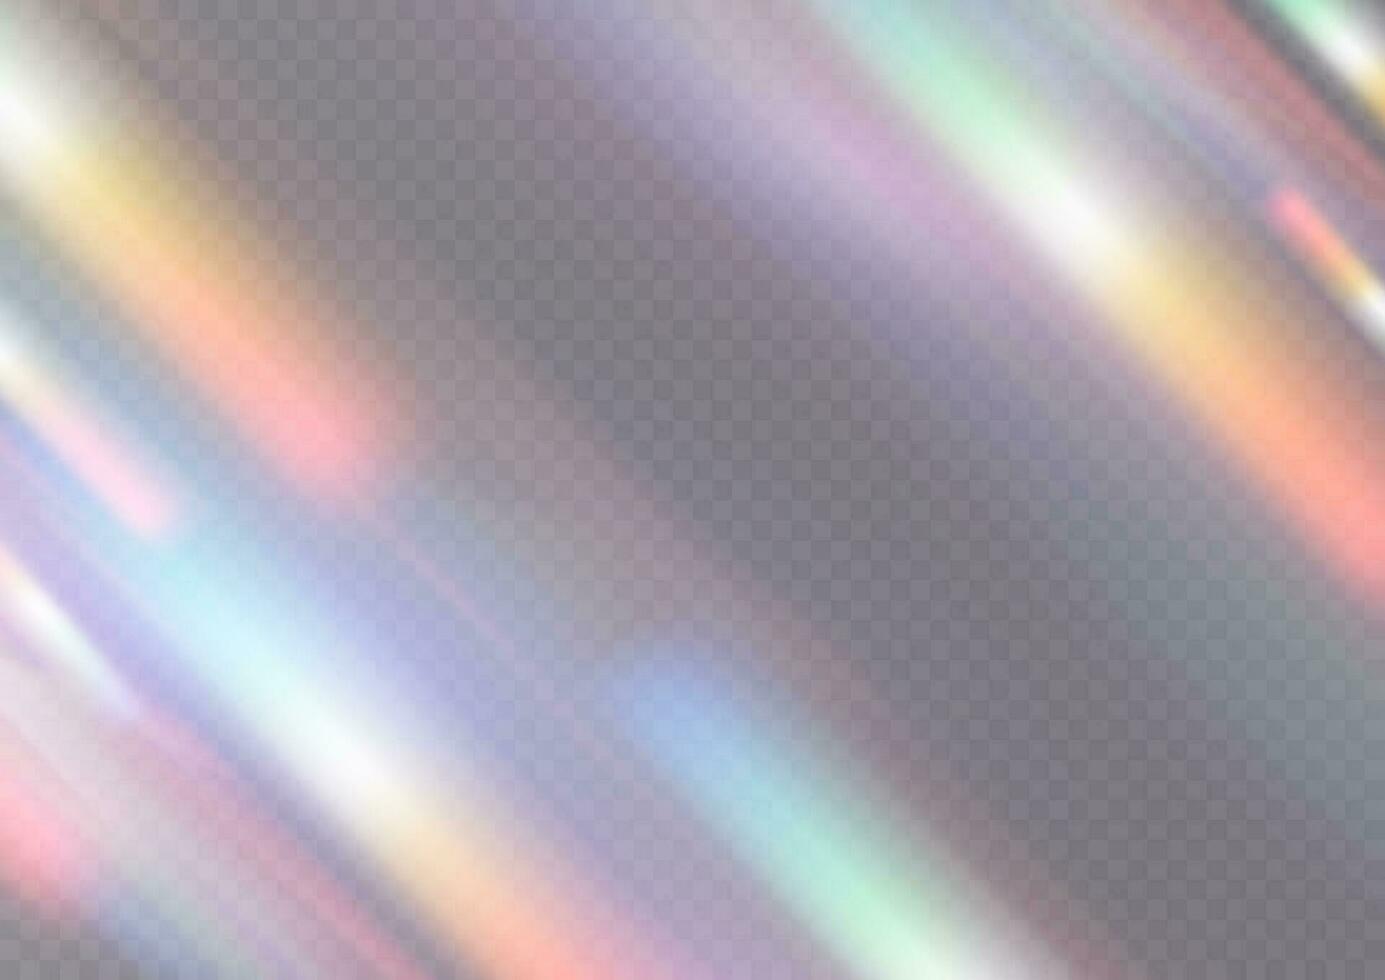 Iridescent crystal leak glare reflection effect. Optical rainbow lights, glare, leak, streak overlay. falling confetti. Vector colorful vector lenses and light flares with effects.